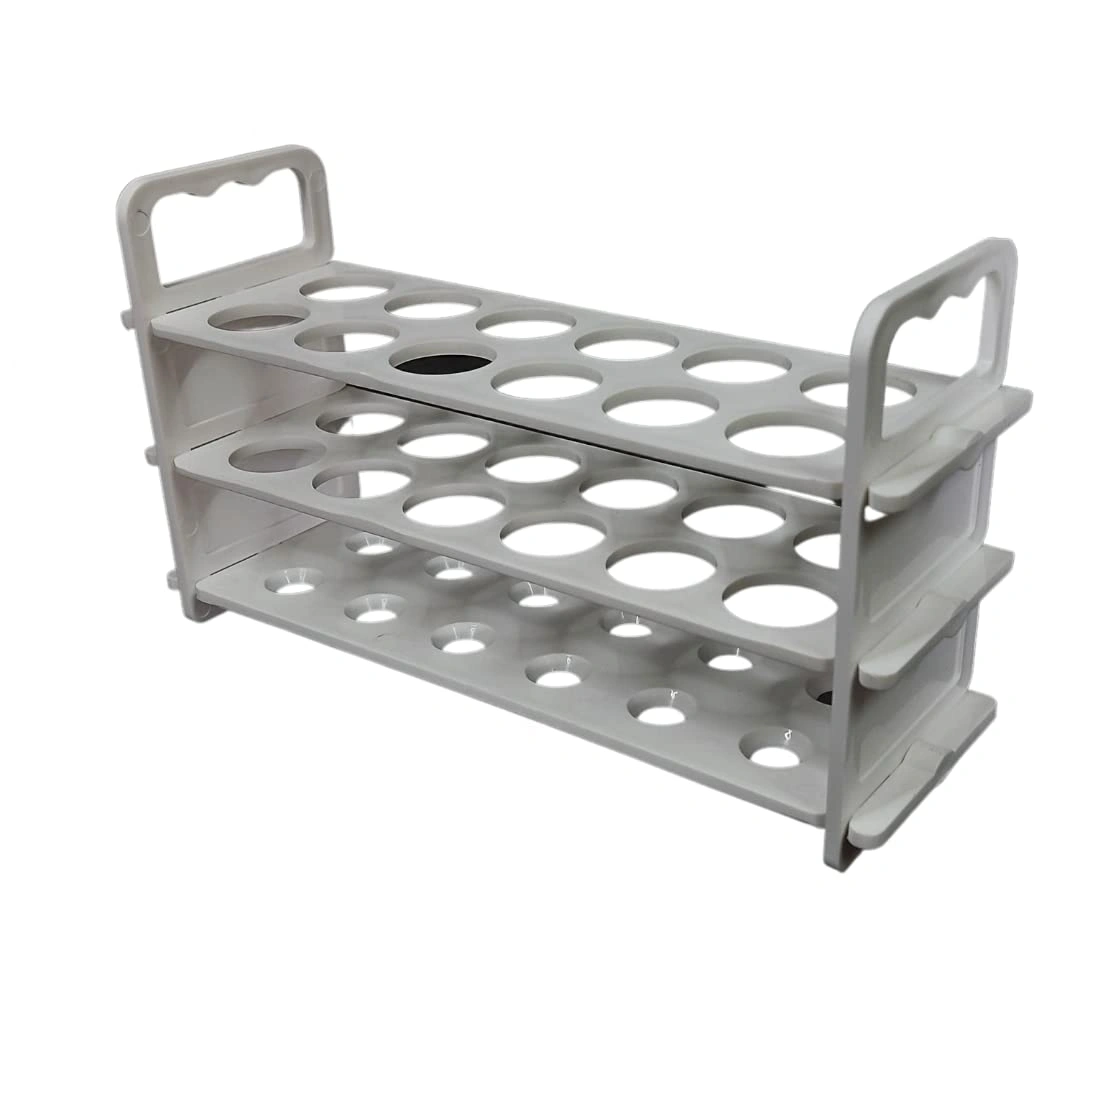 Test tube stand 3 TIER: 25mm × 12 Holes (Pack of 1)-1